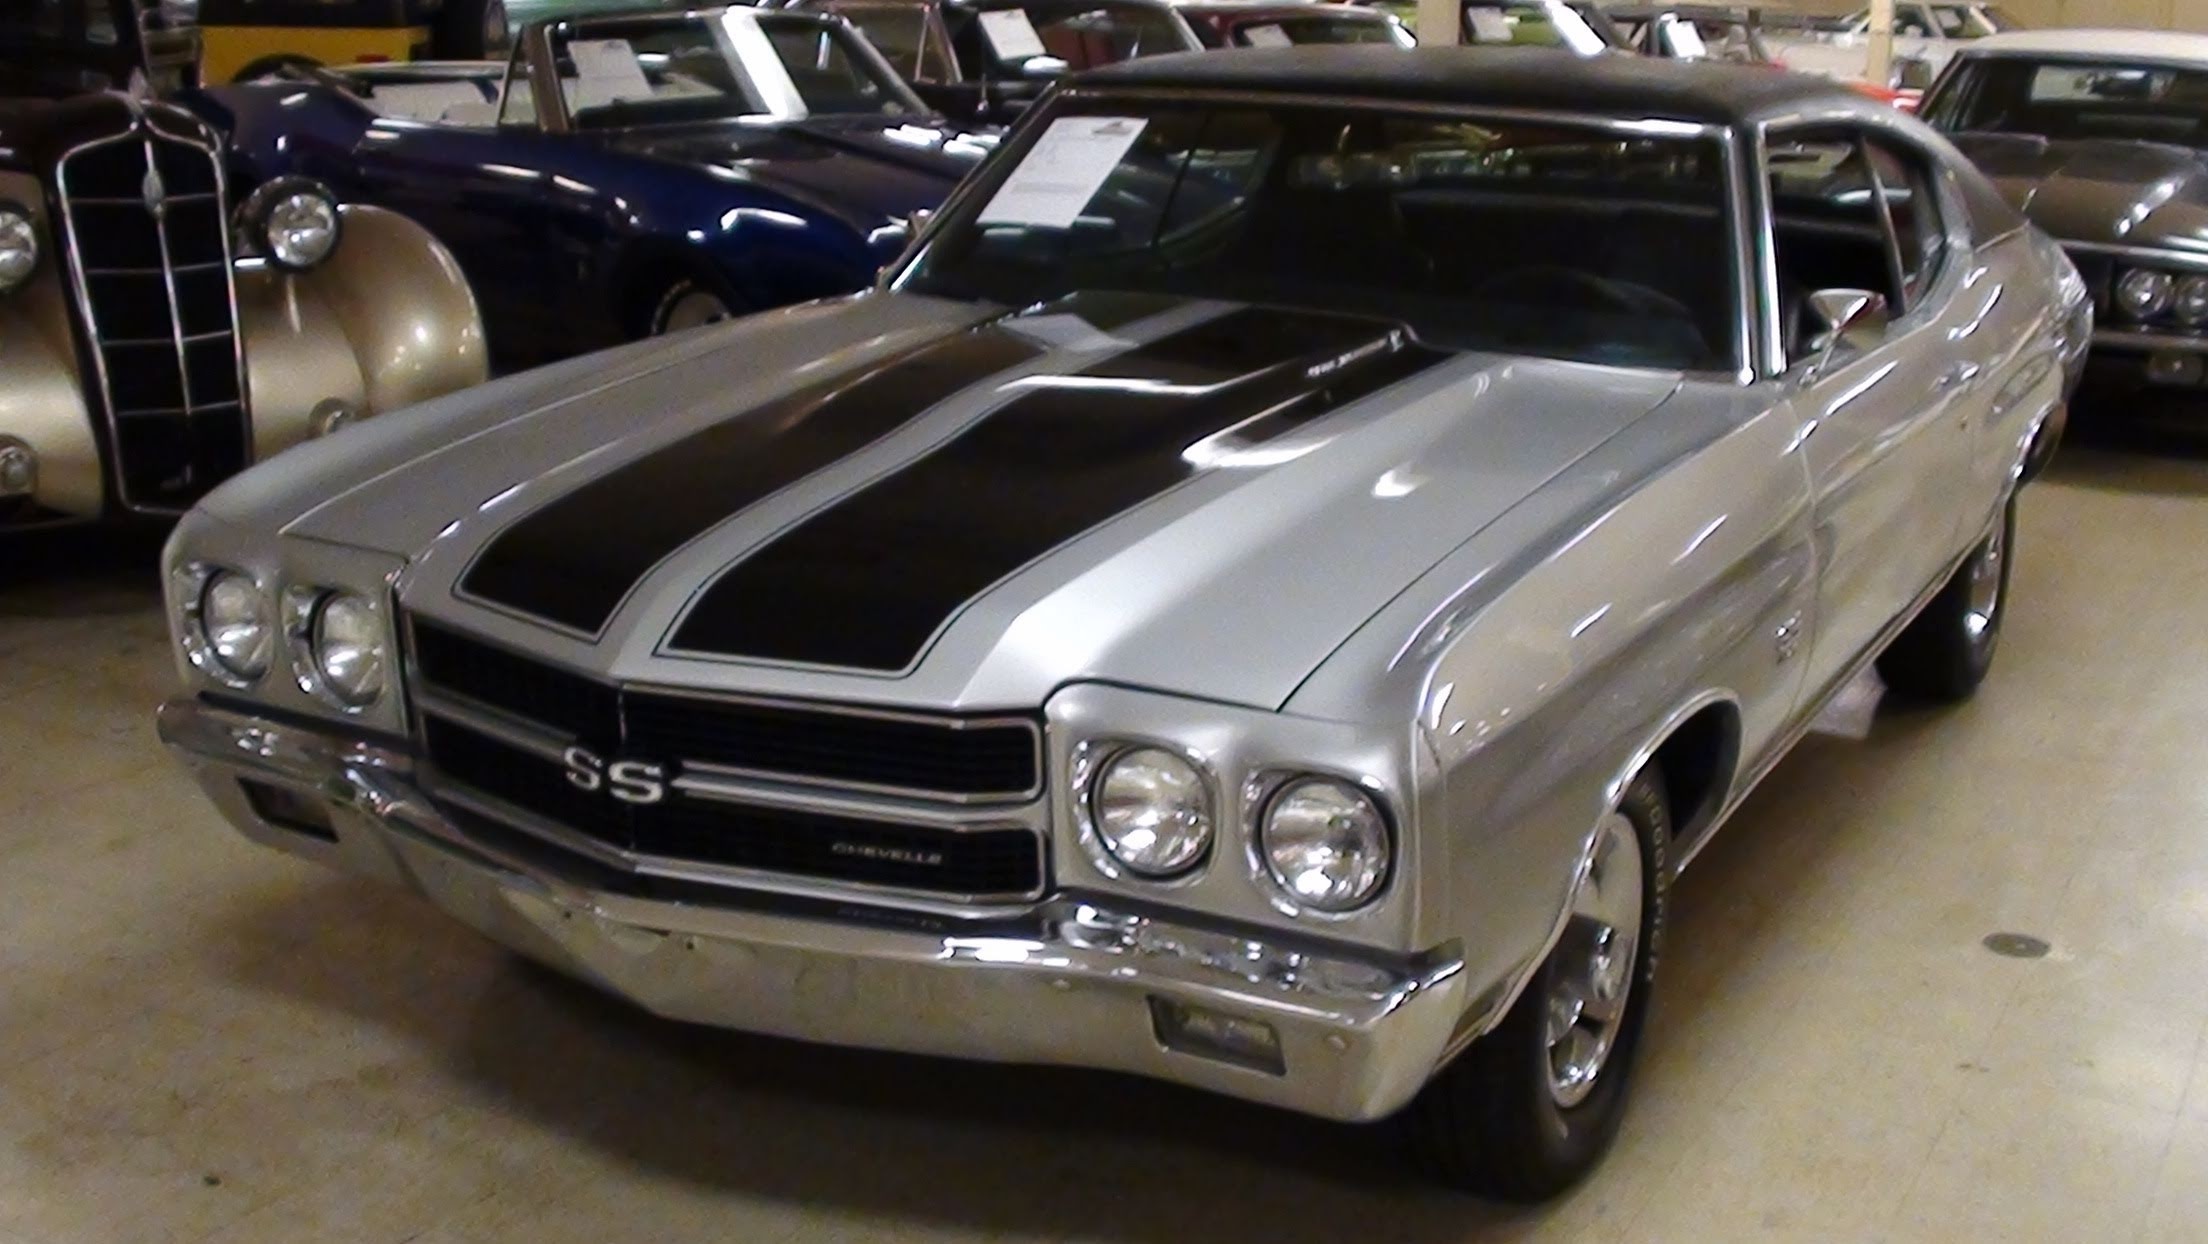 2208x1244 Title : 1970 chevelle ss 454 big-block clone – nicely restored muscle car.  Dimension : 2208 x 1244. File Type : JPG/JPEG